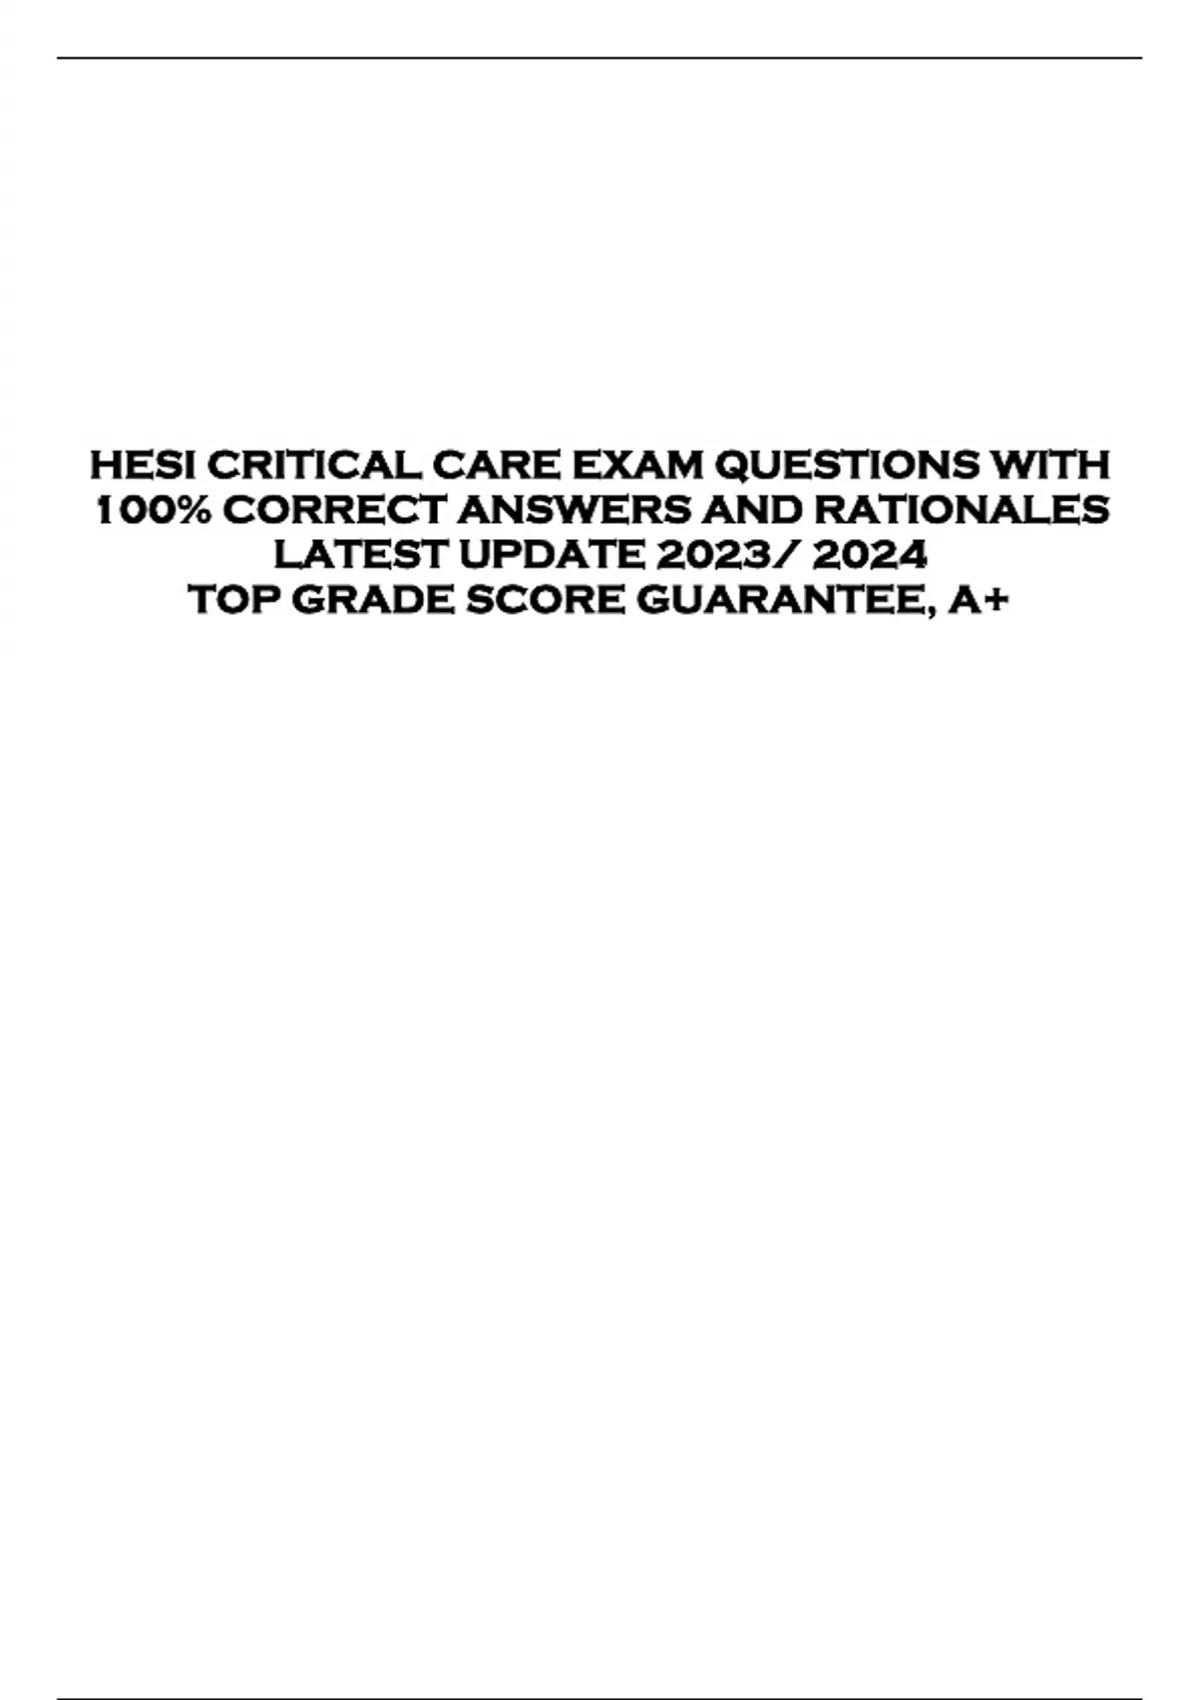 HESI CRITICAL CARE EXAM QUESTIONS WITH 100 CORRECT ANSWERS AND